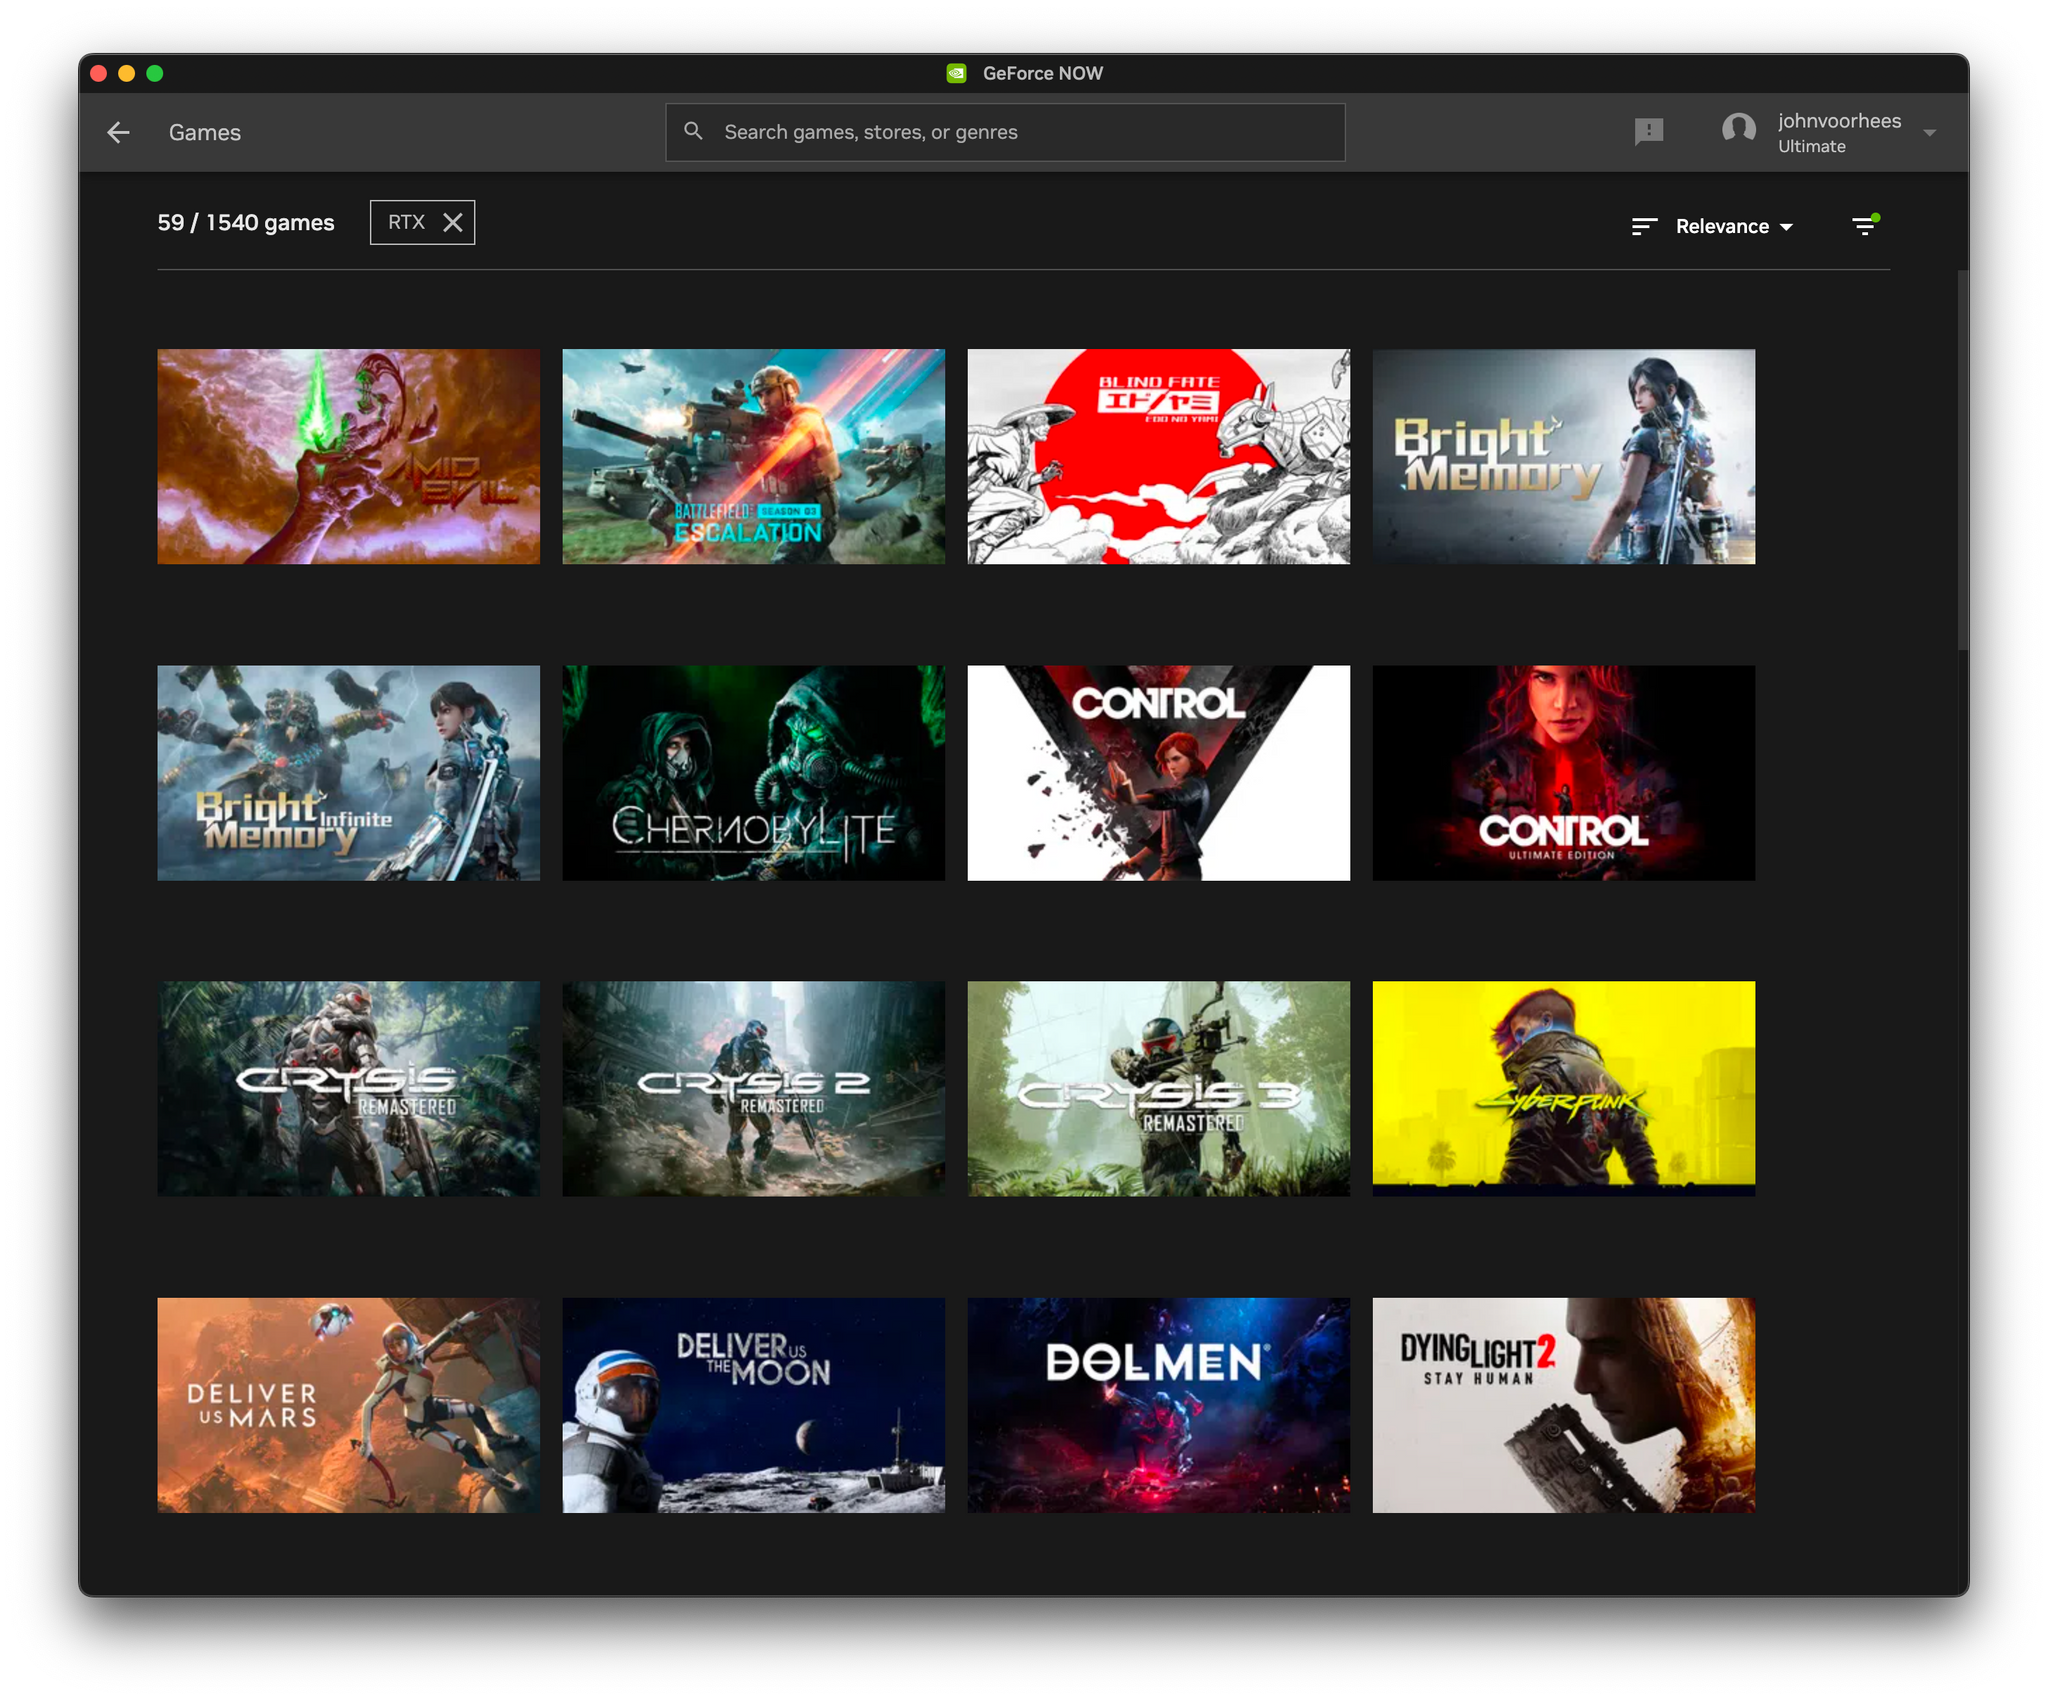 Browsing GeForce NOW-compatible games in its Mac app.